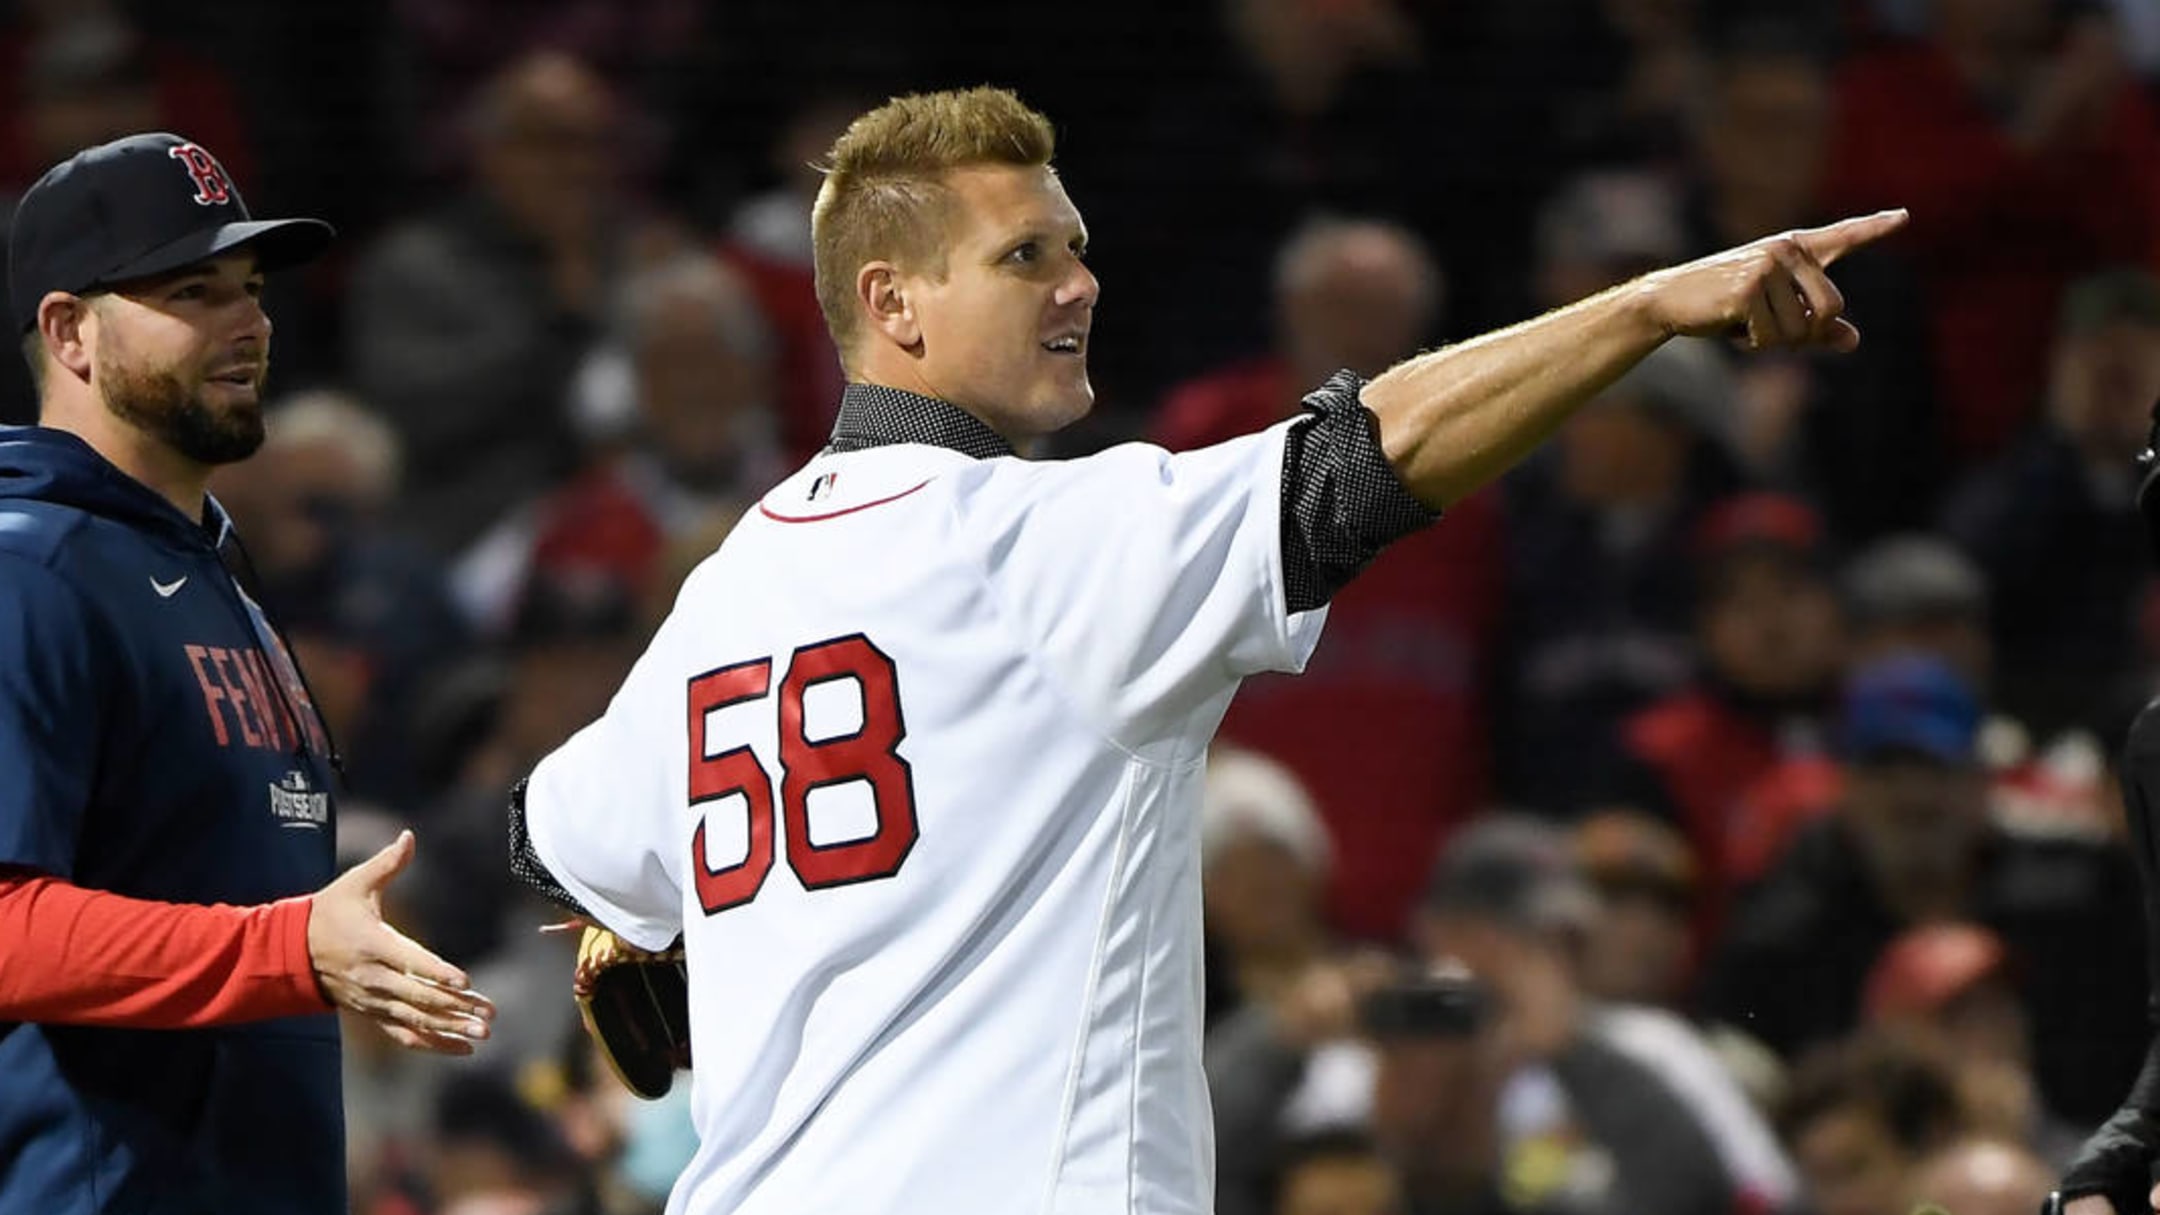 Jonathan Papelbon on how he moved on from a bad outing as a closer😂, Usually a little bit of wine or something like that would usually help  #RedSox, nesn.com/redsox